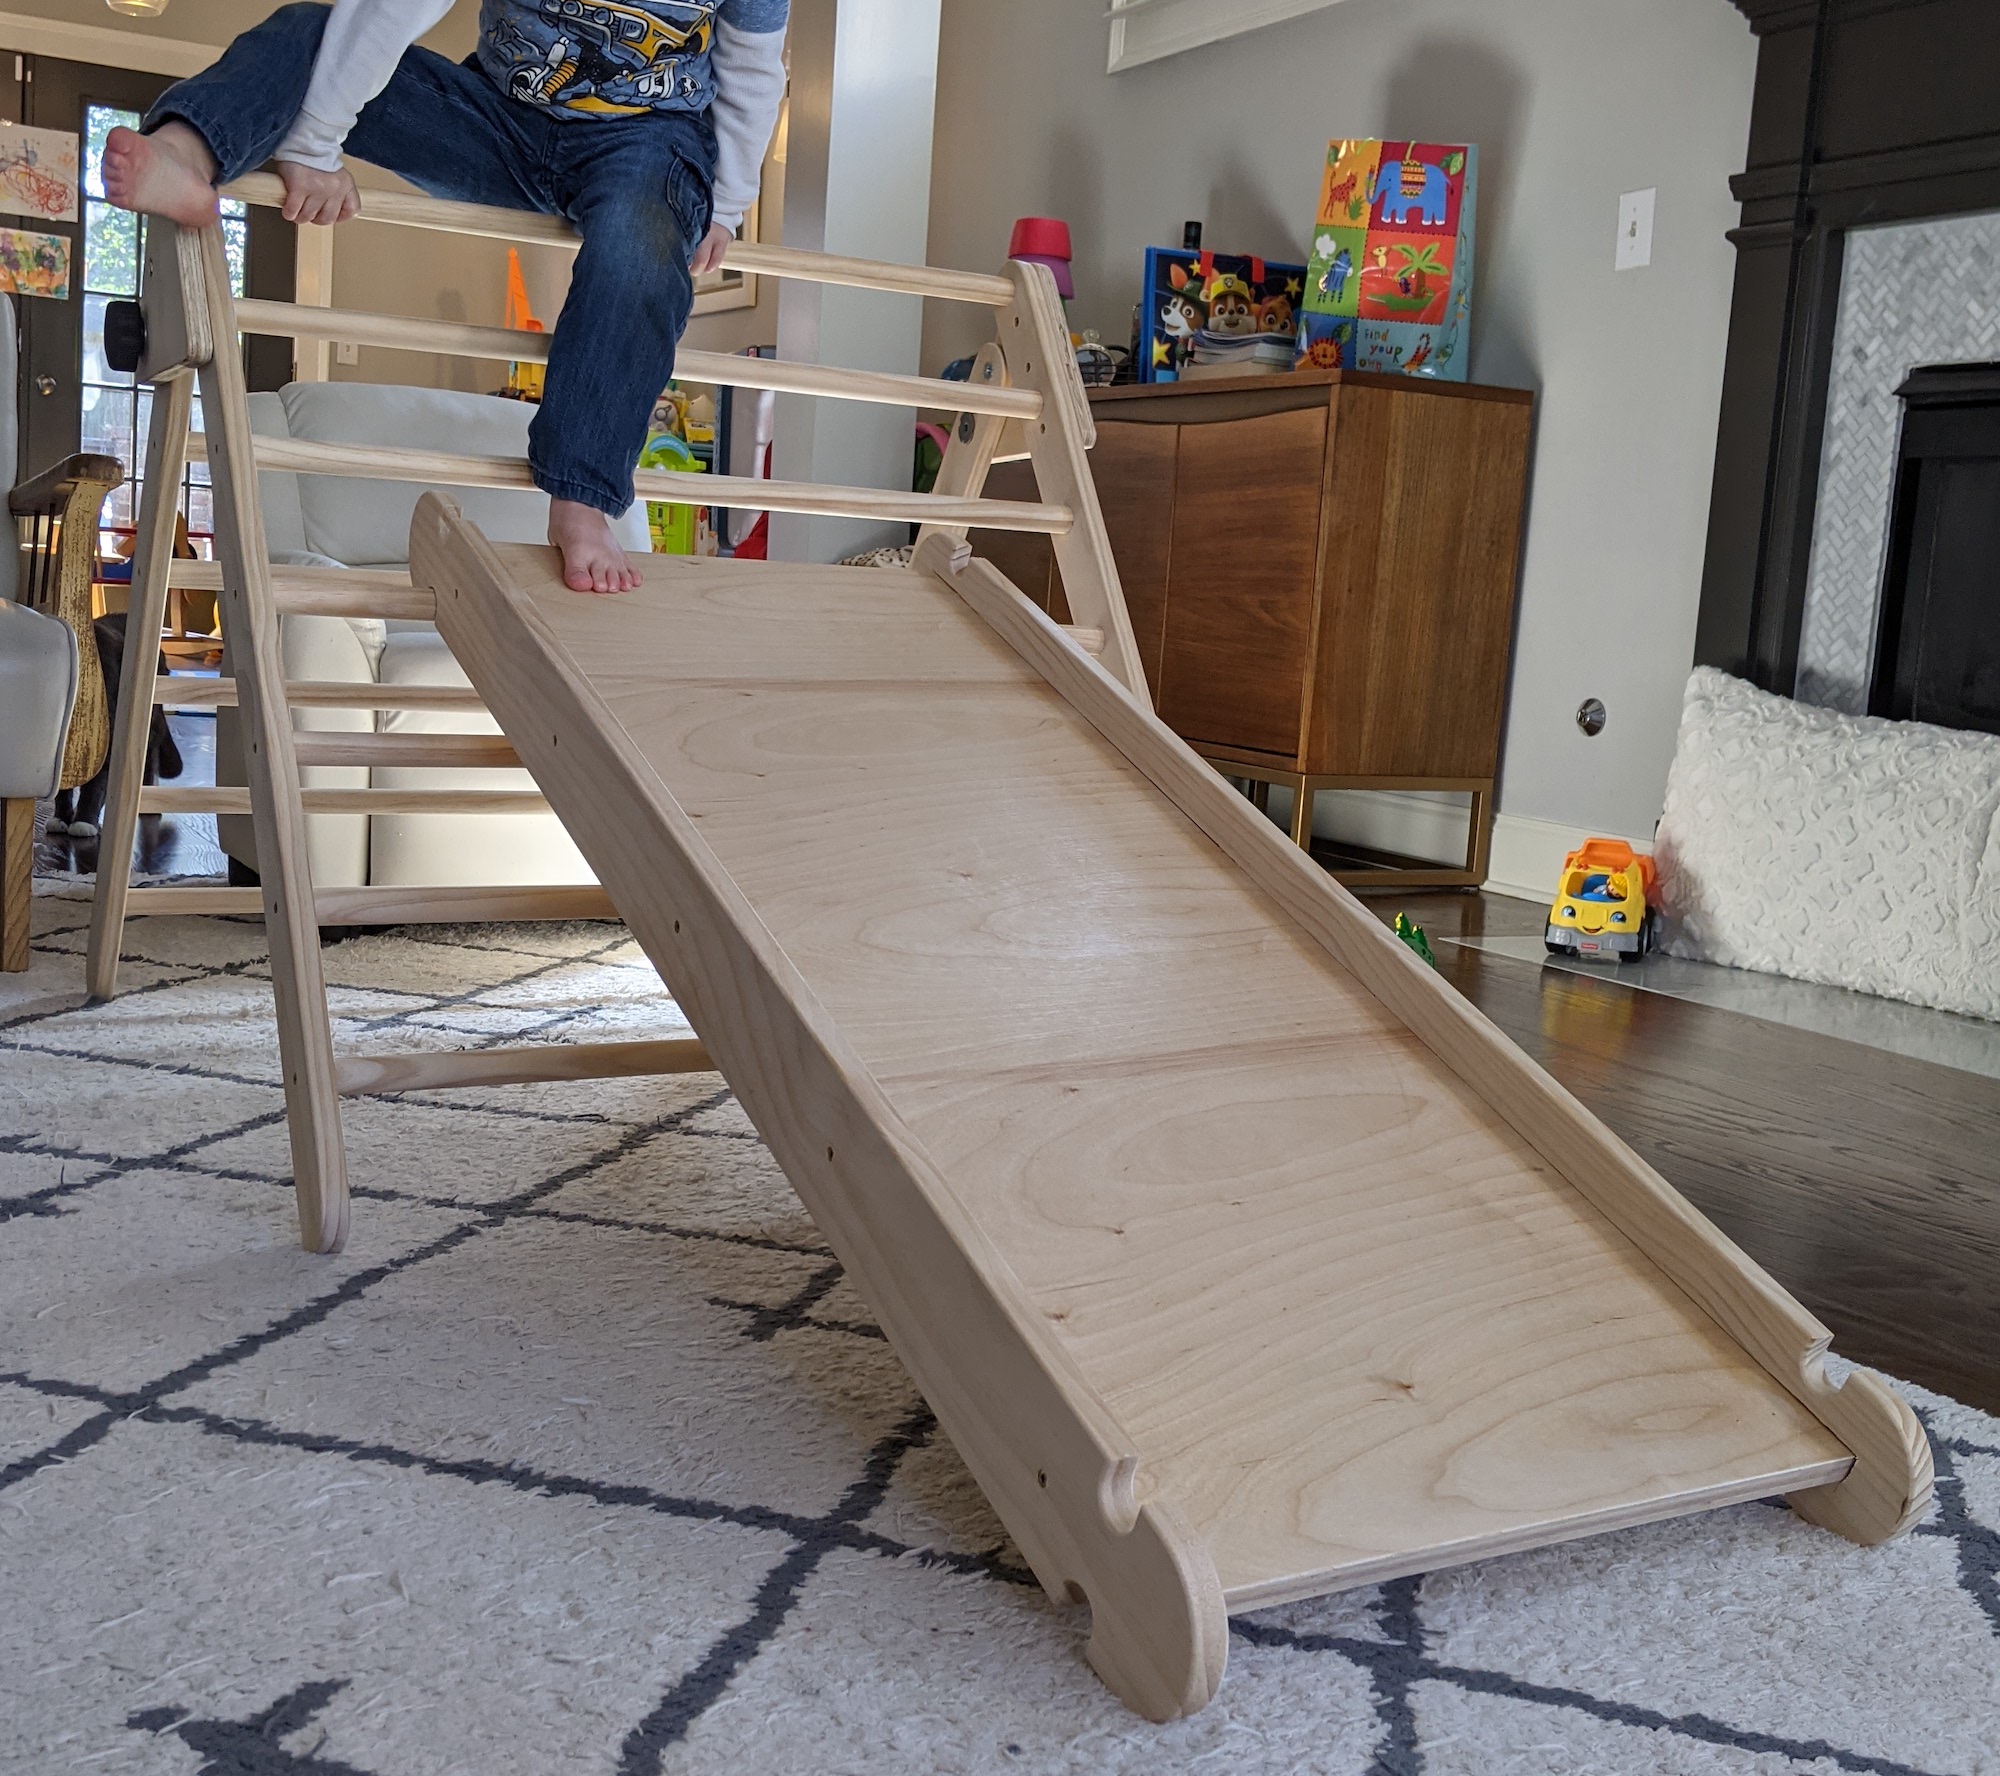 DIY Pikler Triangle Slide - How to build a $200 slide from scratch